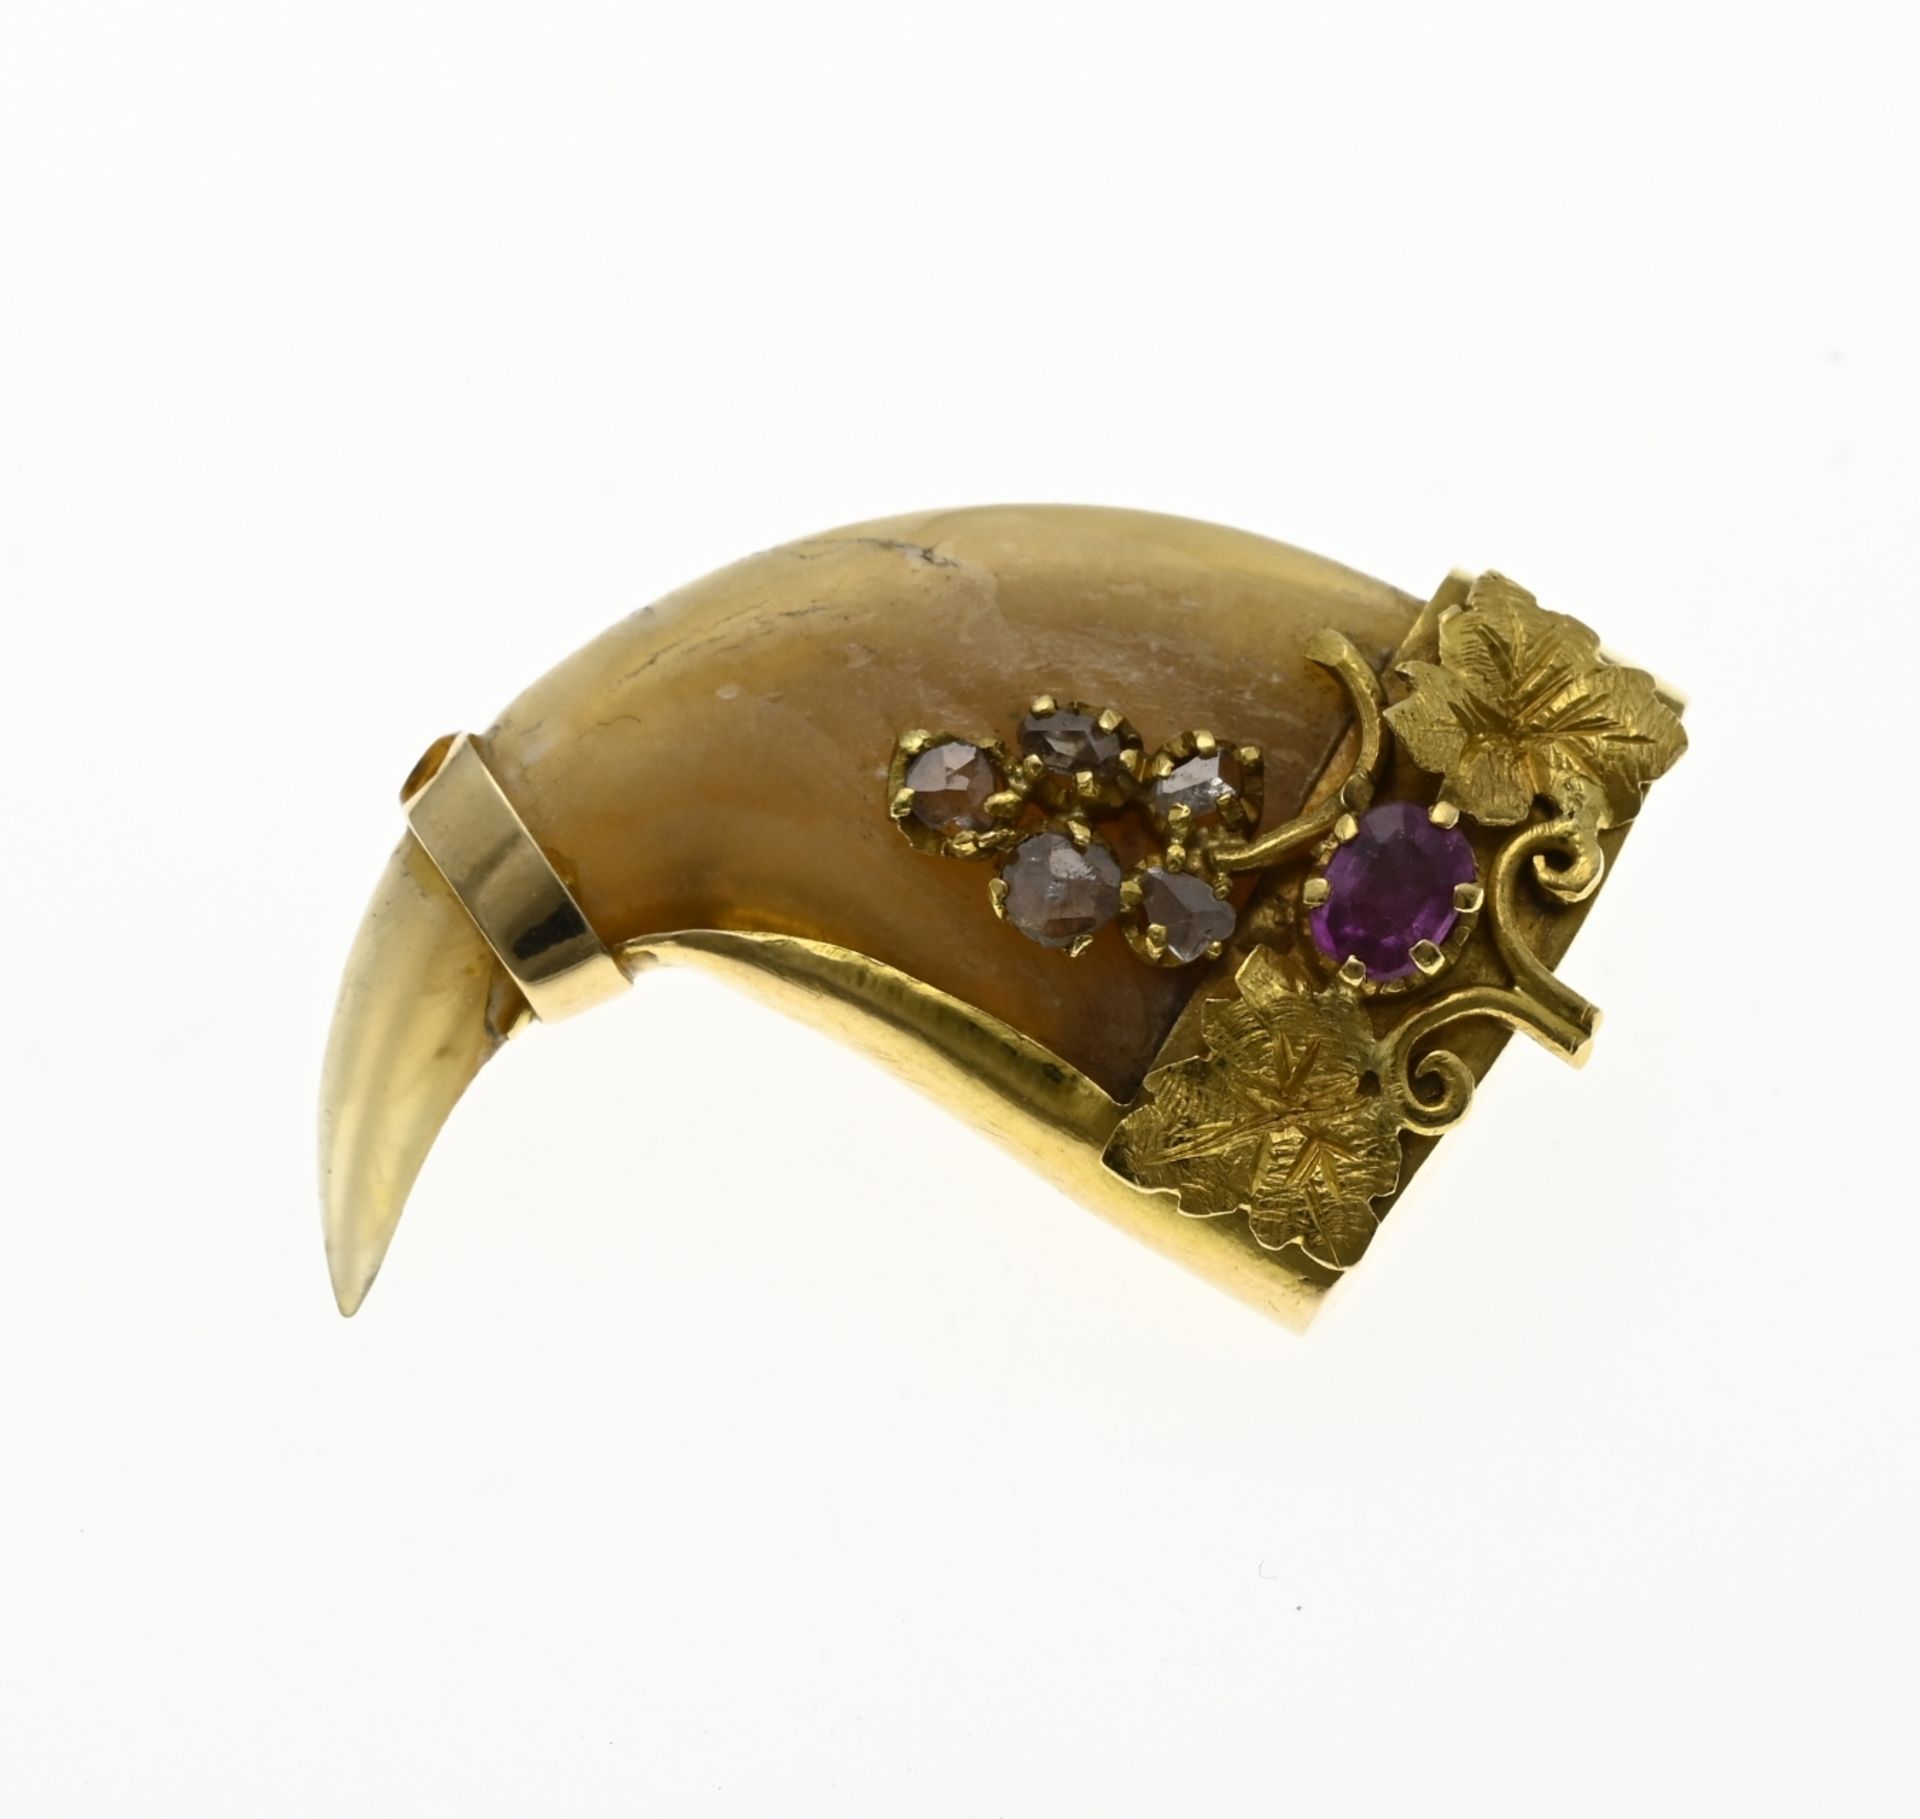 Gold brooch with tooth and stones